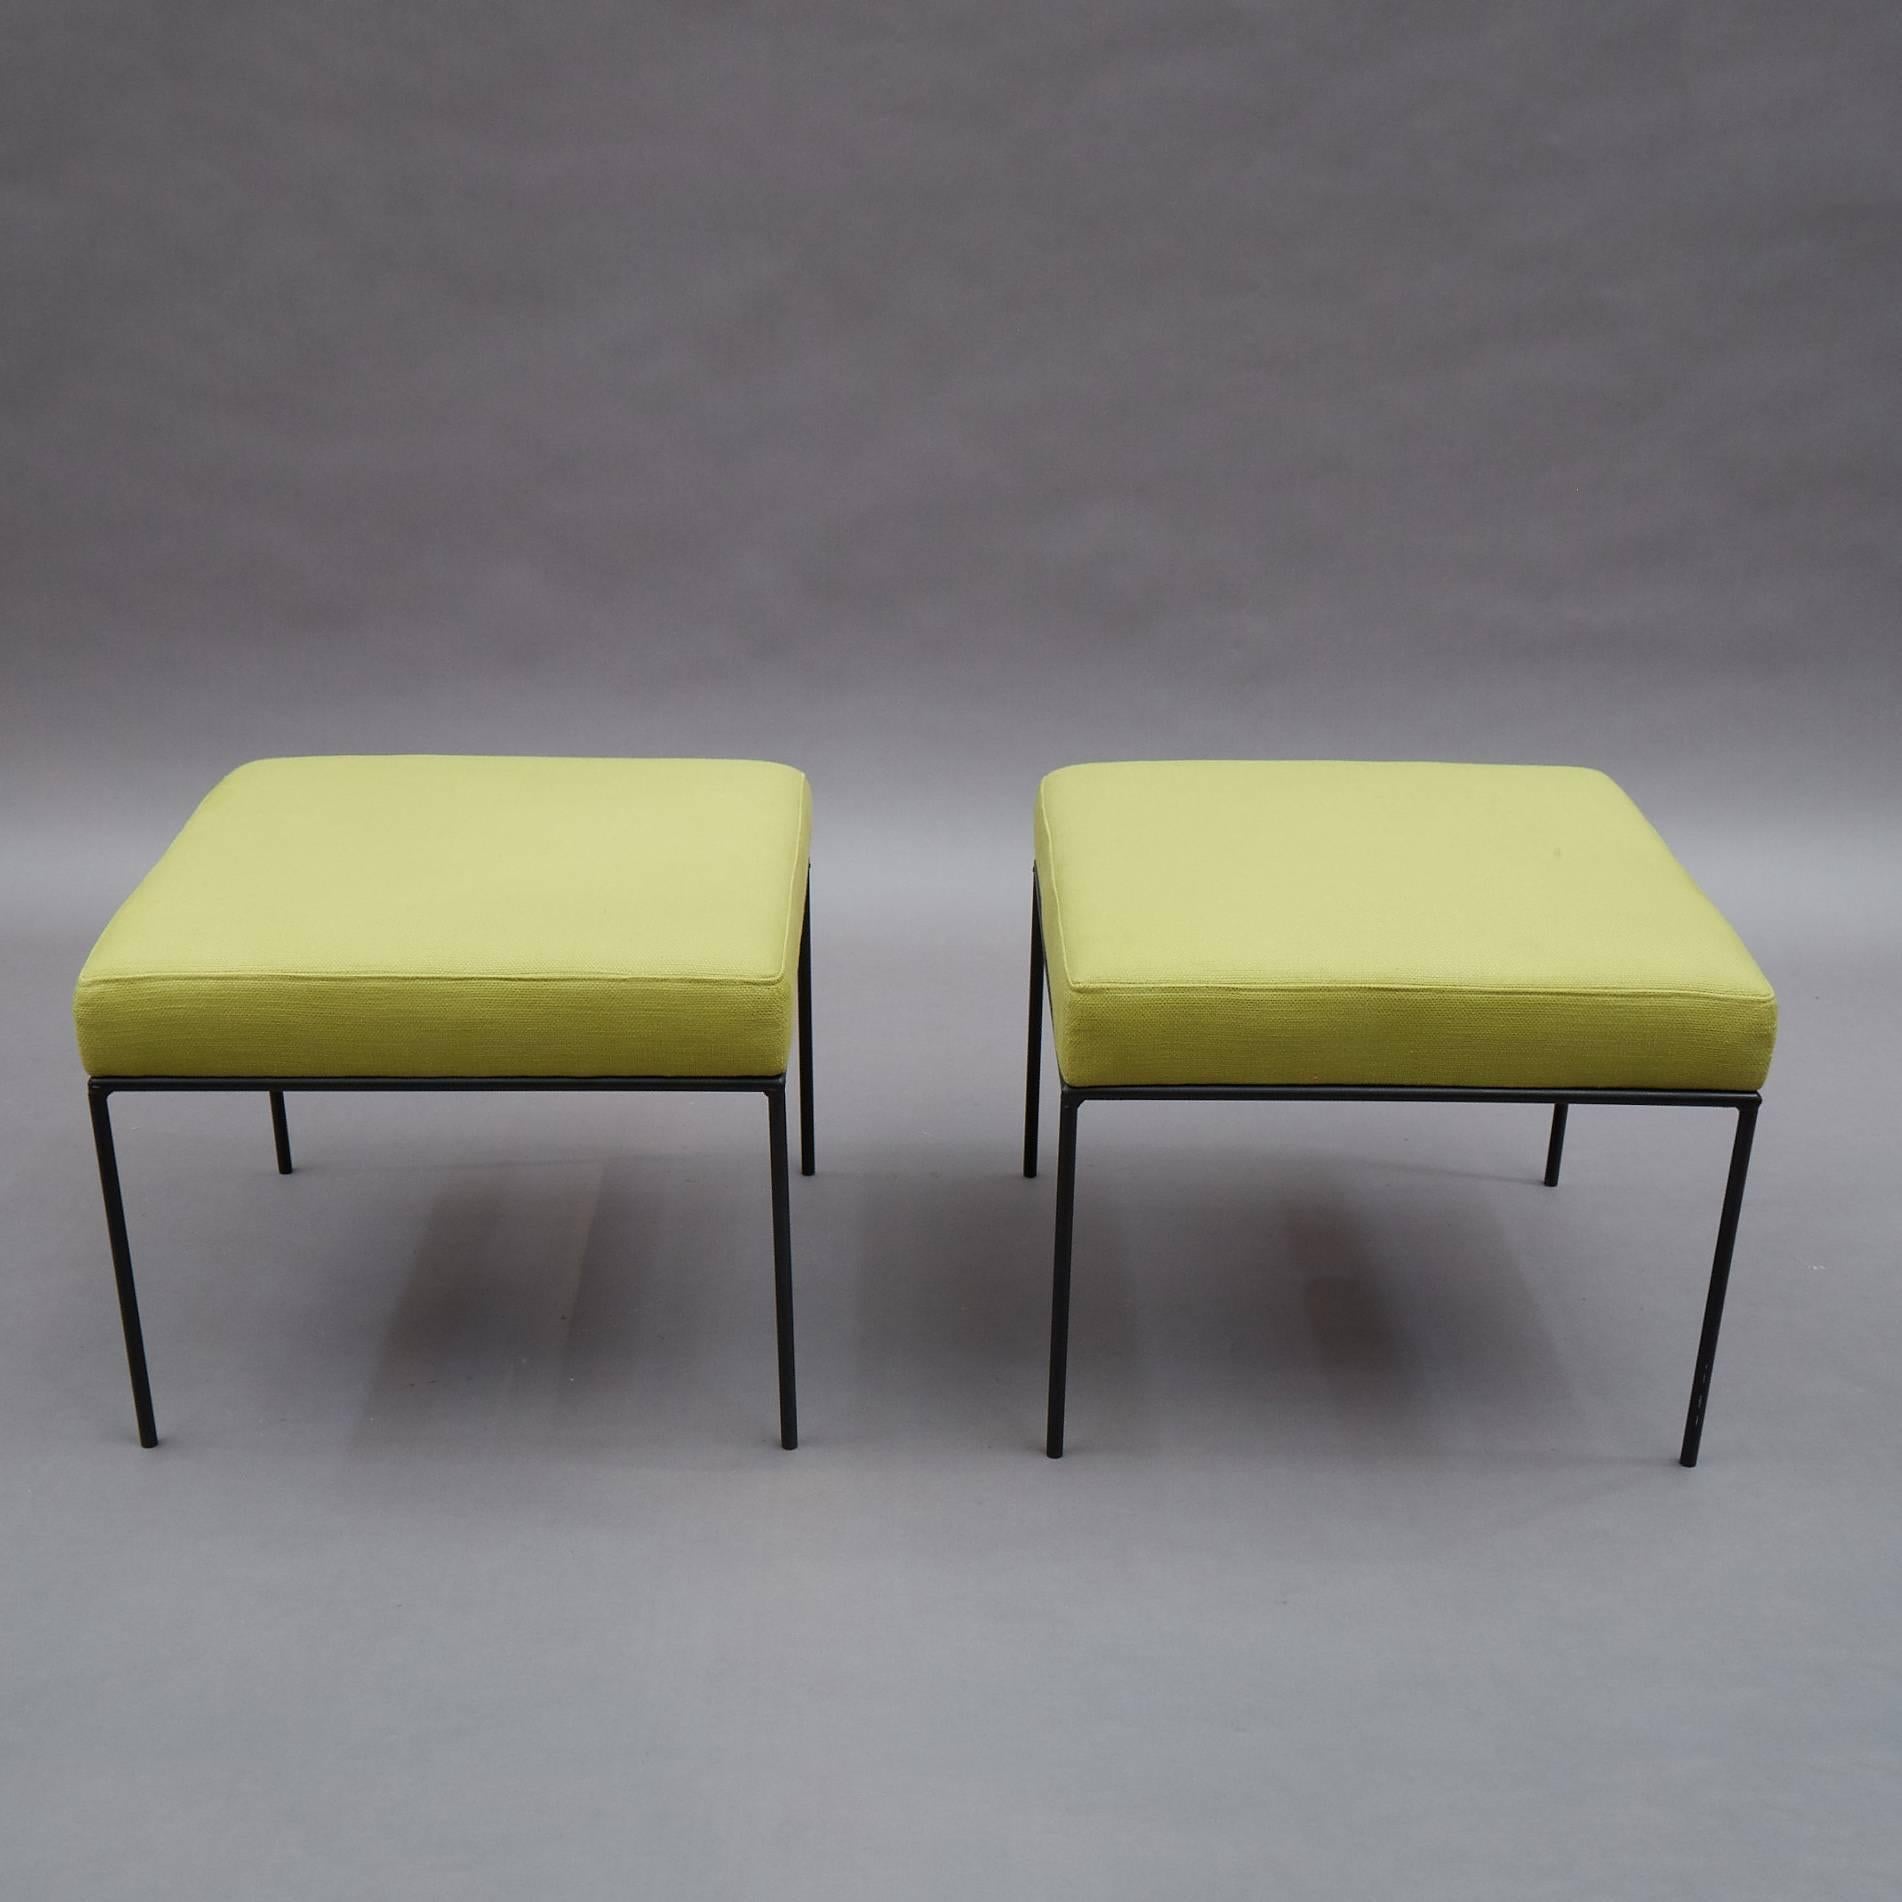 Mid-Century Modern Paul McCobb Square Wrought Iron and Chartreuse Linen Ottomans